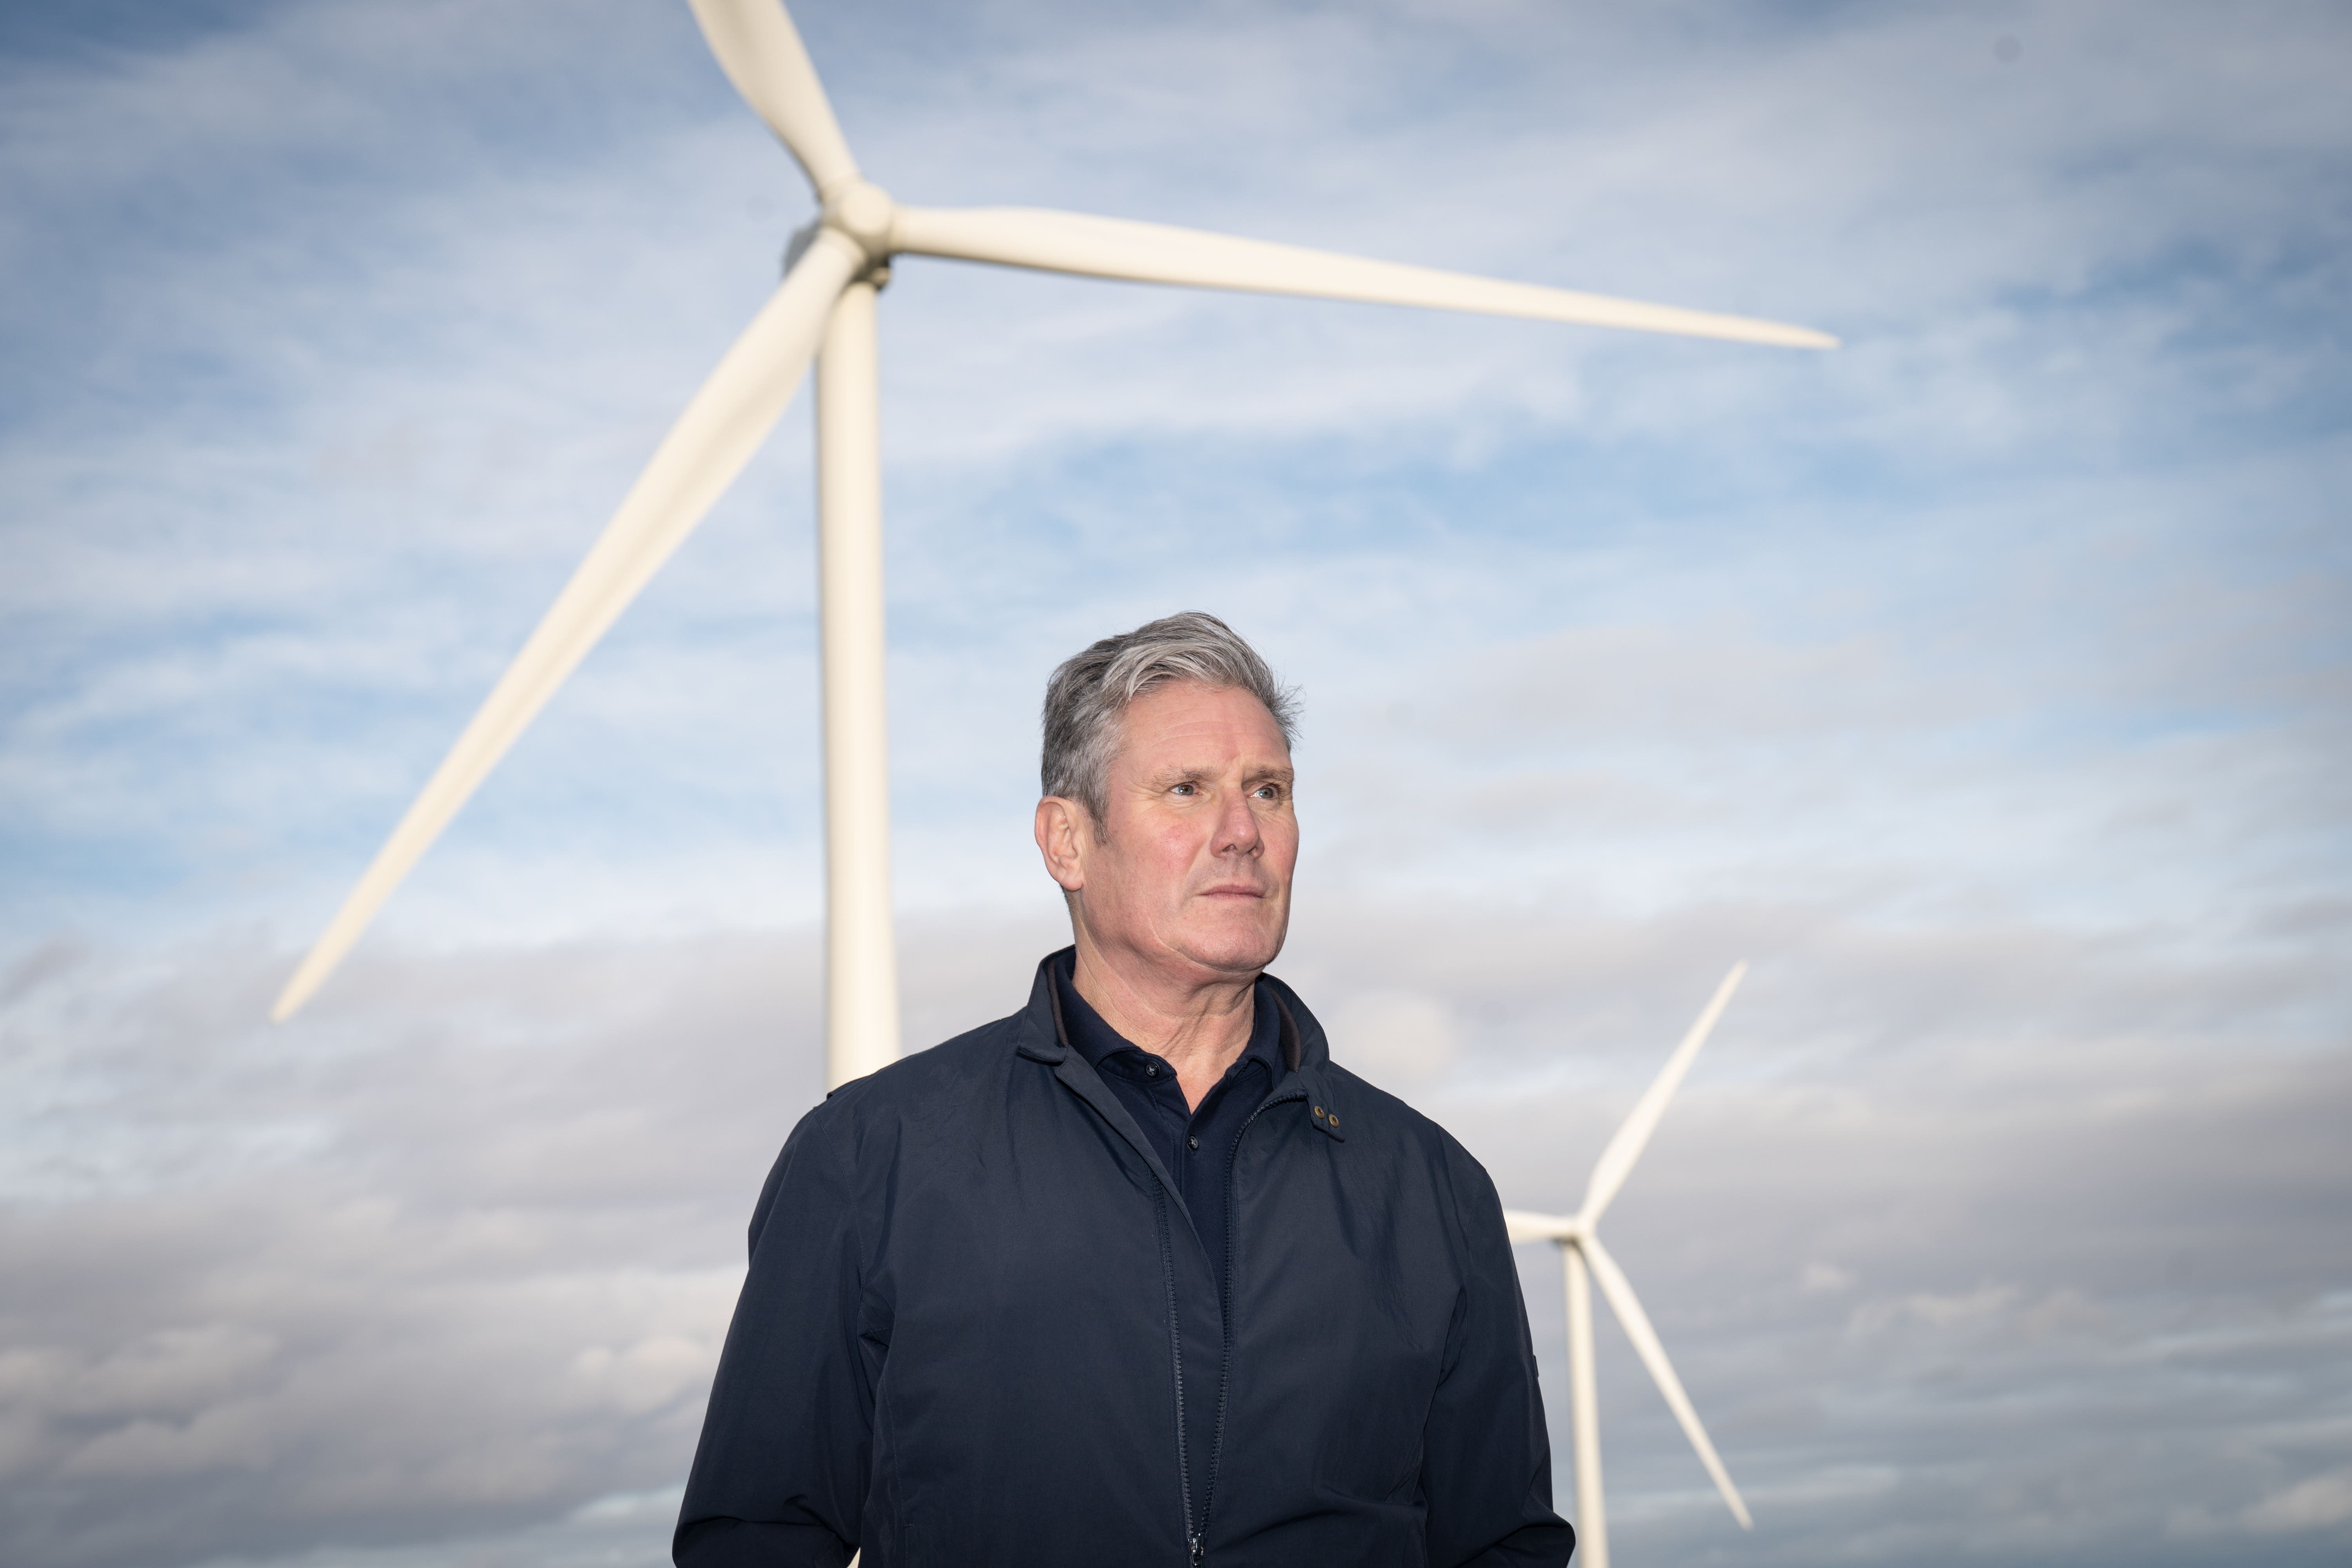 Sir Keir Starmer said GB Energy will help ensure ‘clean energy by 2030, cheaper bills, and good jobs across the country’ (Stefan Rousseau/PA)